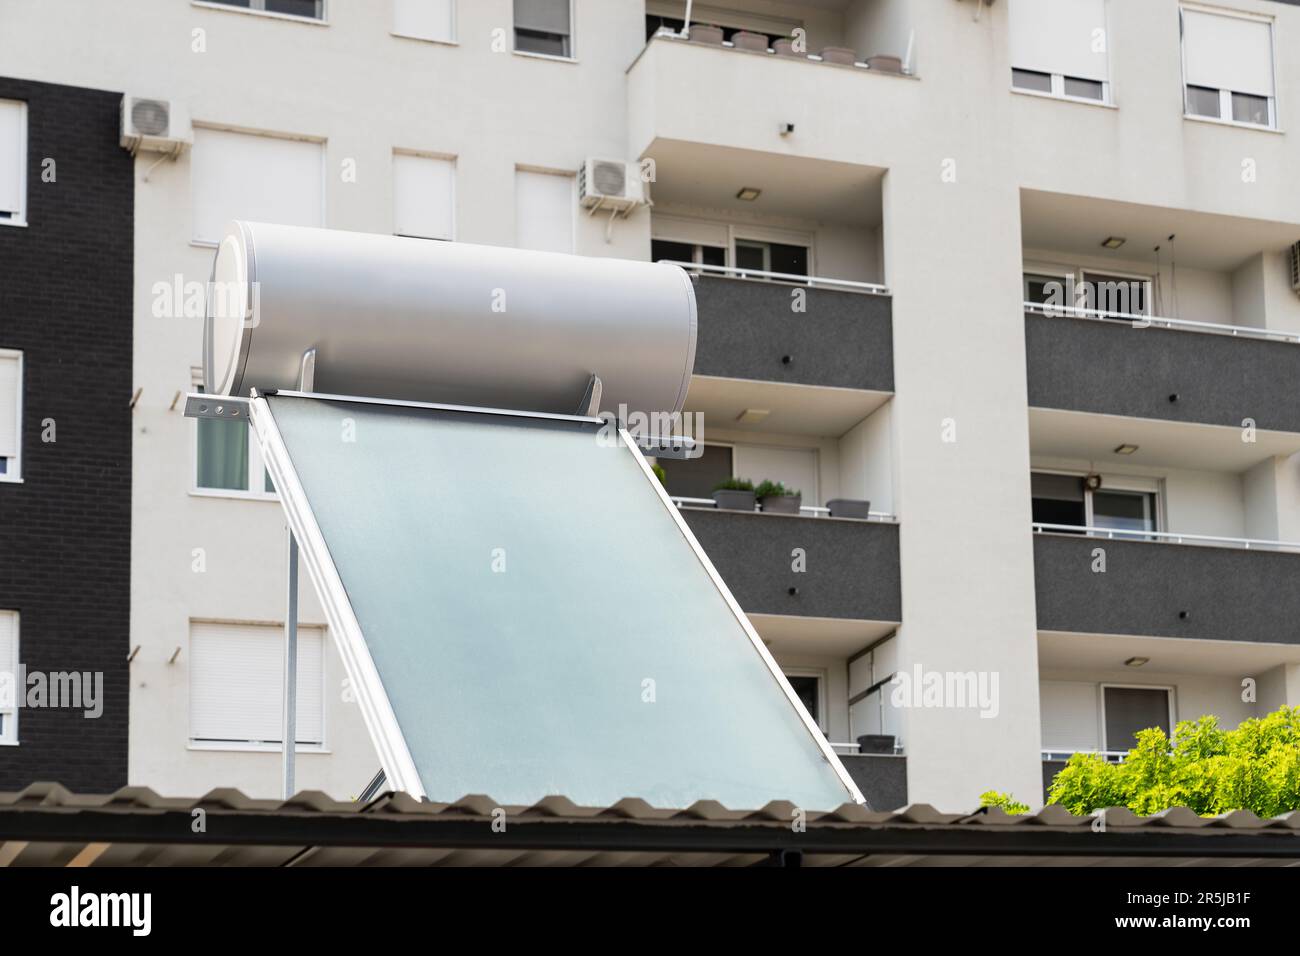 Solar collector for heating water using solar energy. High quality photo Stock Photo